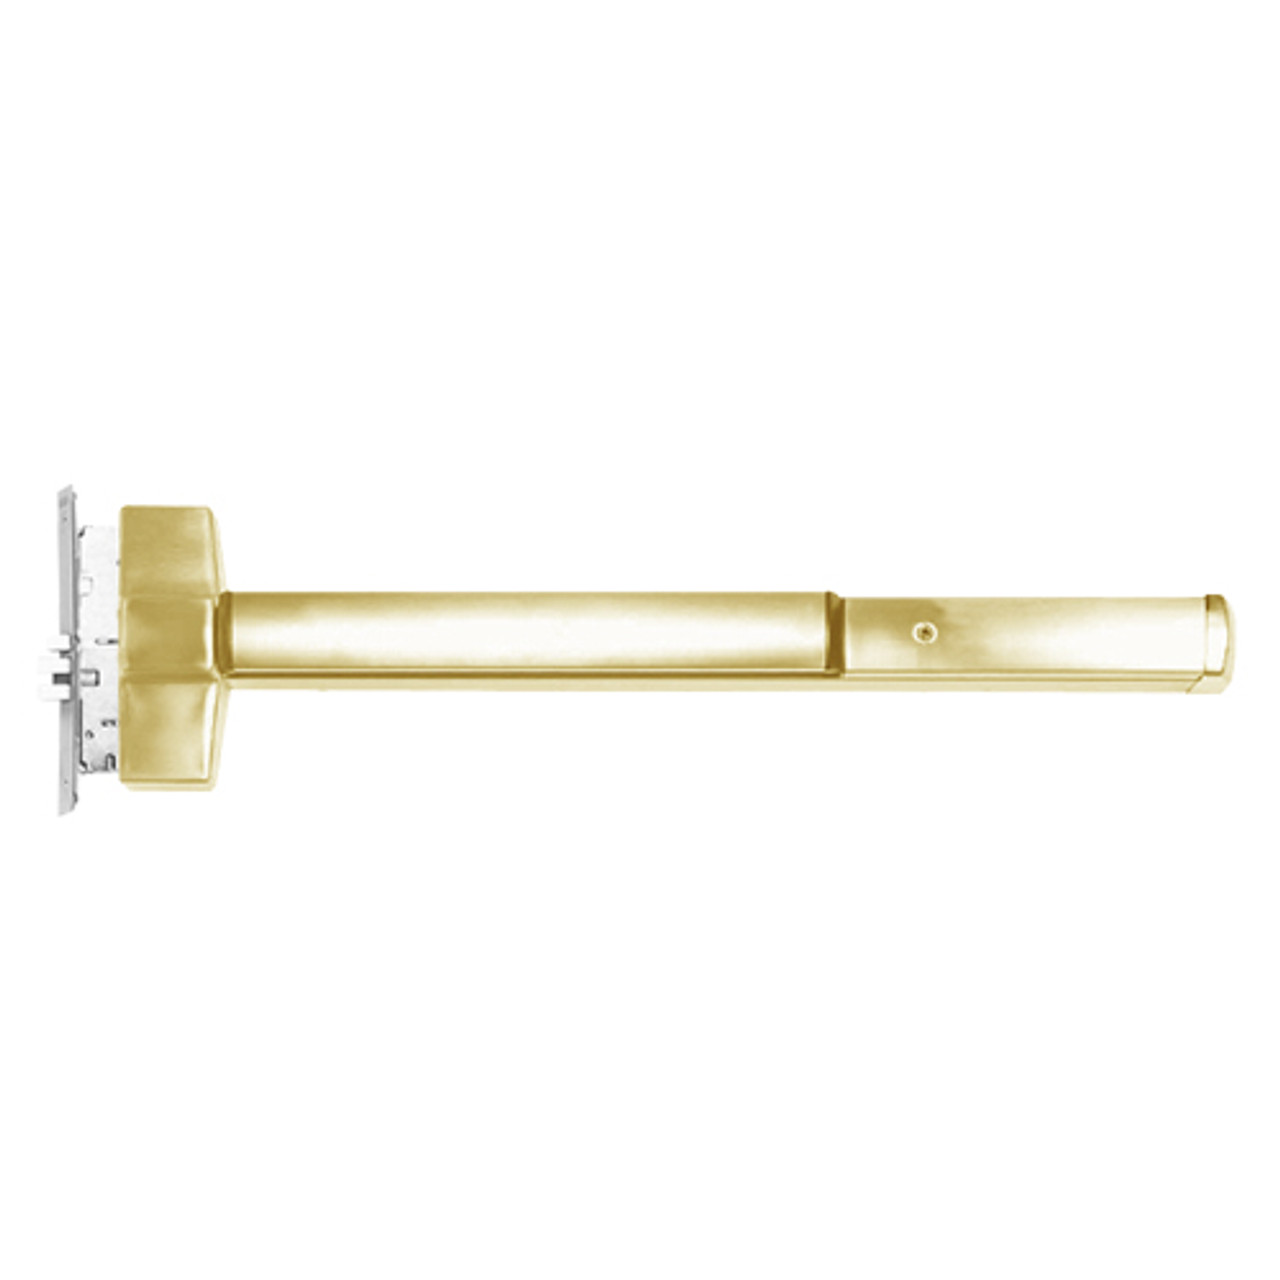 ED5600L-606-RHR-SAF Corbin ED5600 Series Non Fire Rated Mortise Exit Device in Satin Brass Finish